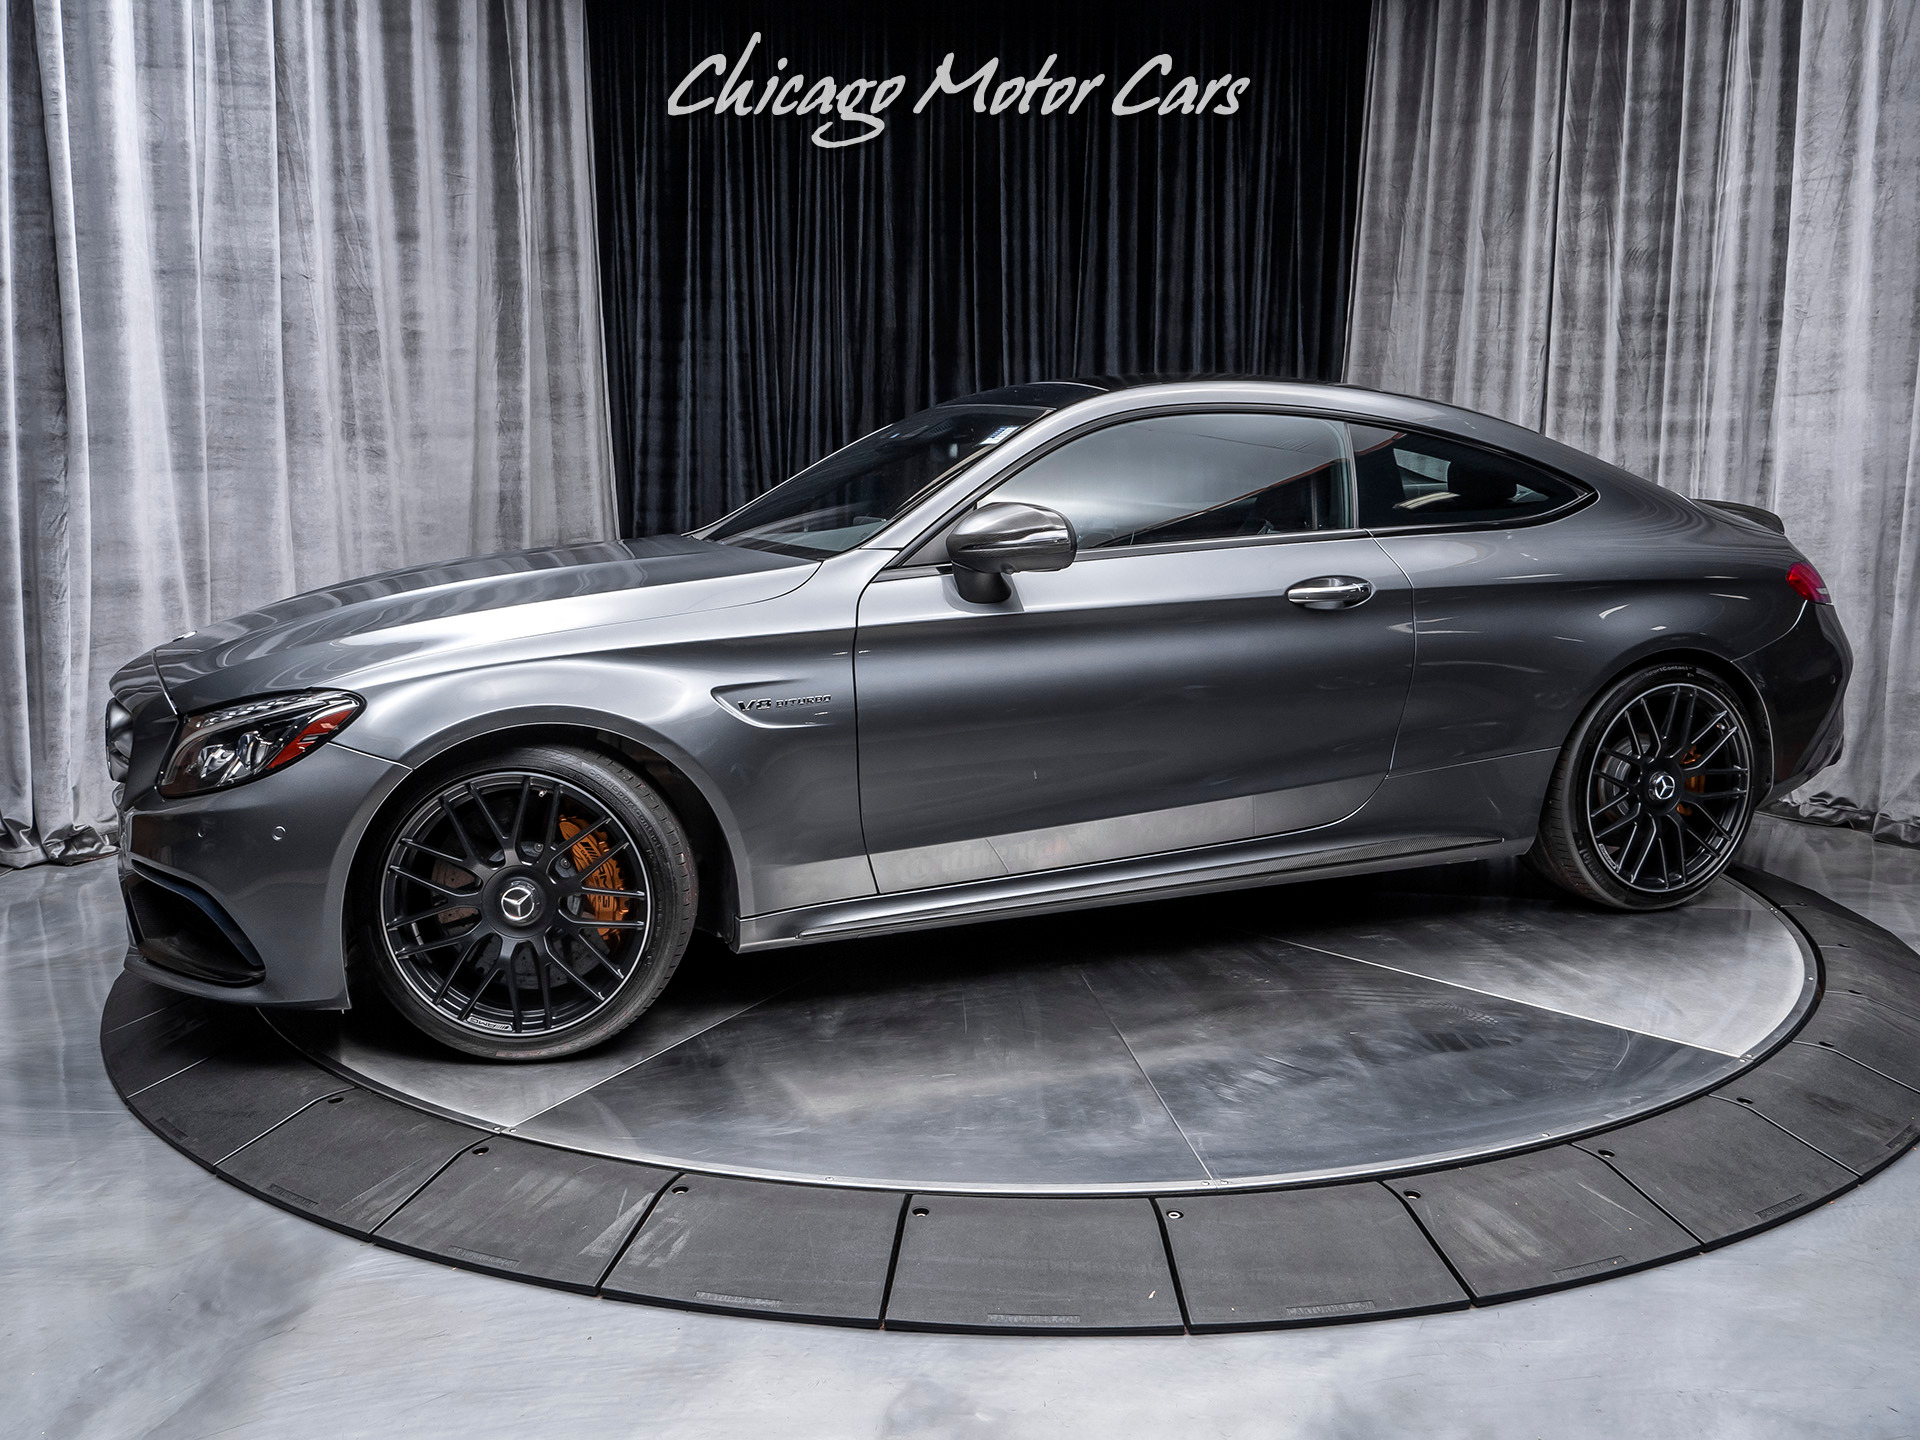 Used 17 Mercedes Benz C63 Amg S Coupe For Sale Special Pricing Chicago Motor Cars Stock